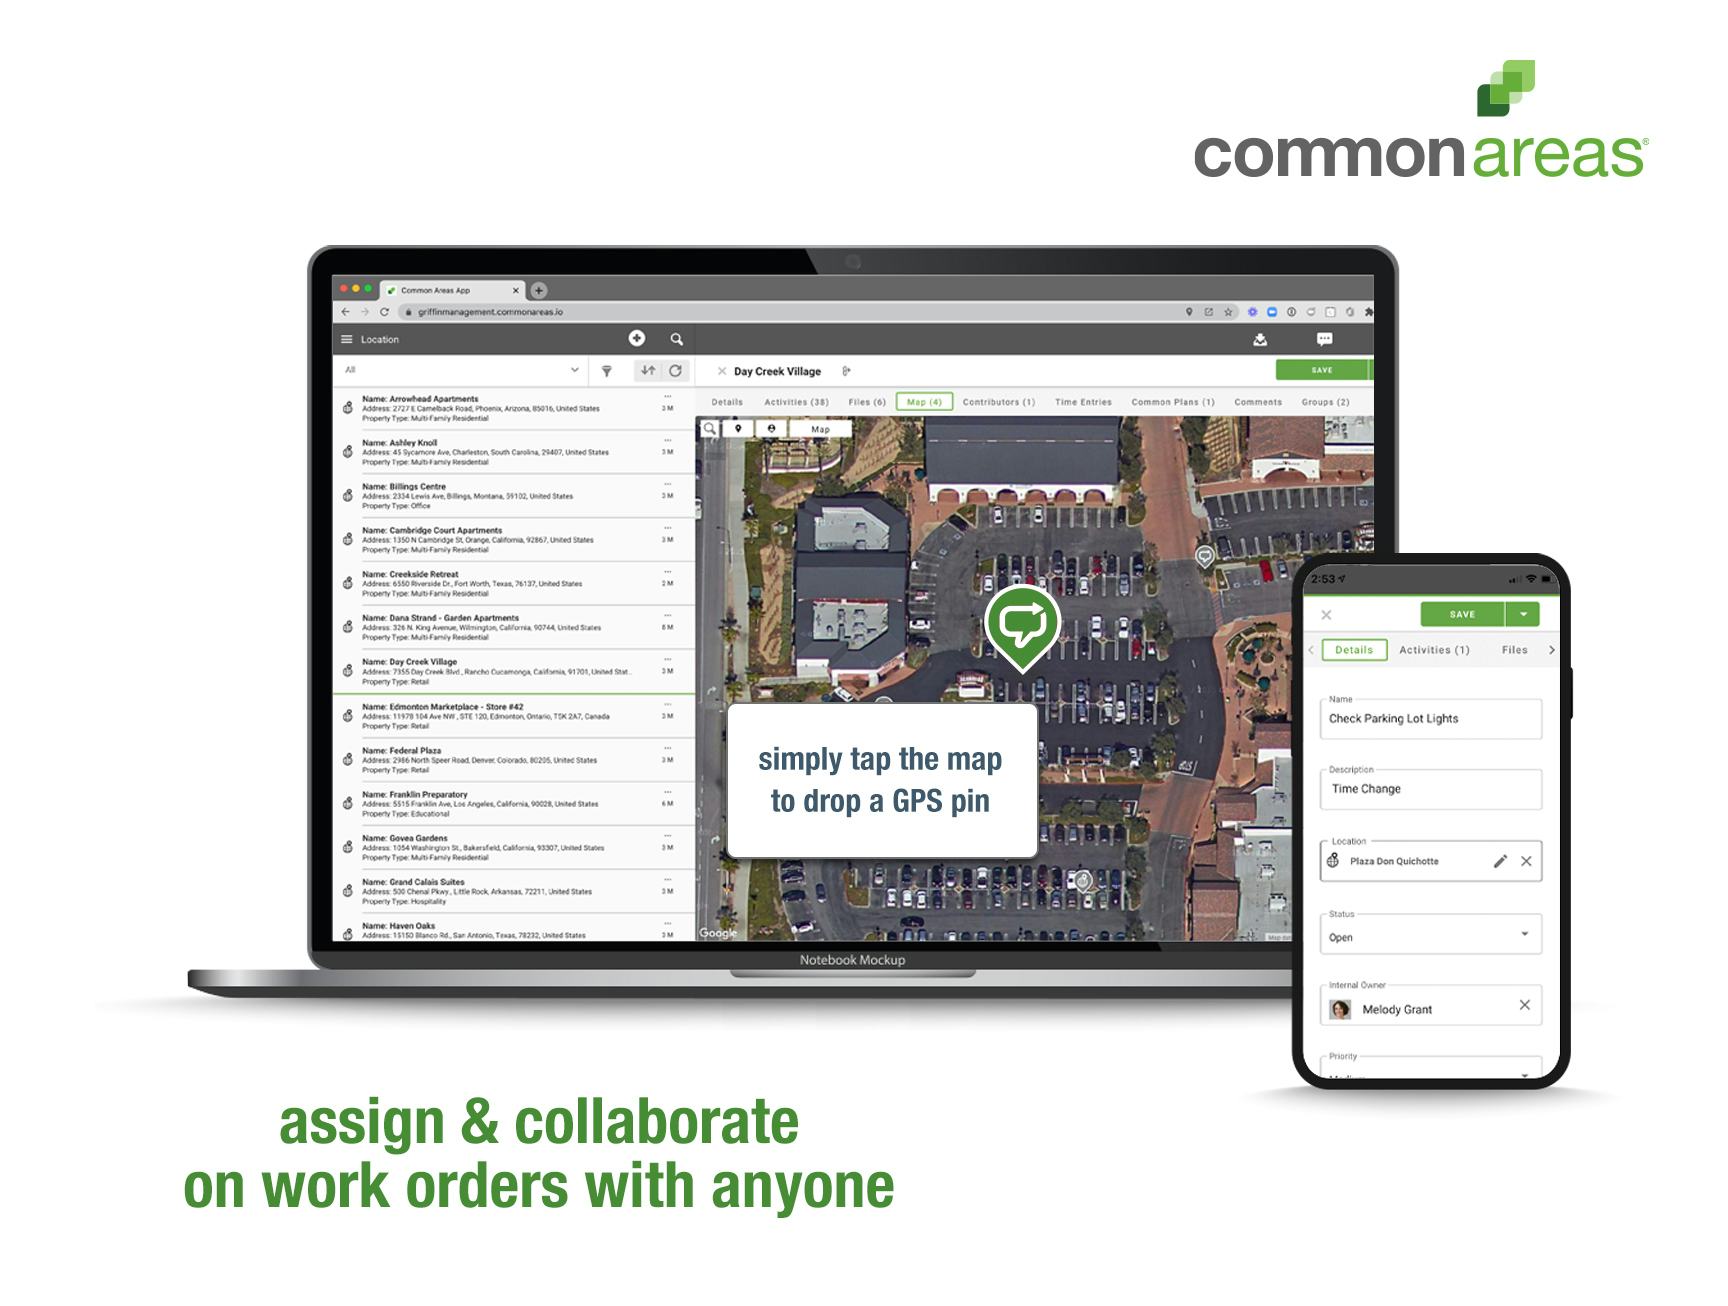 Common Areas Software - Create, assign and track work orders with everyone you work with inside or outside of your company. Easily provide everything needed for you and your teams to get the work done right including files, photos, GPS pins, status notifications and more.